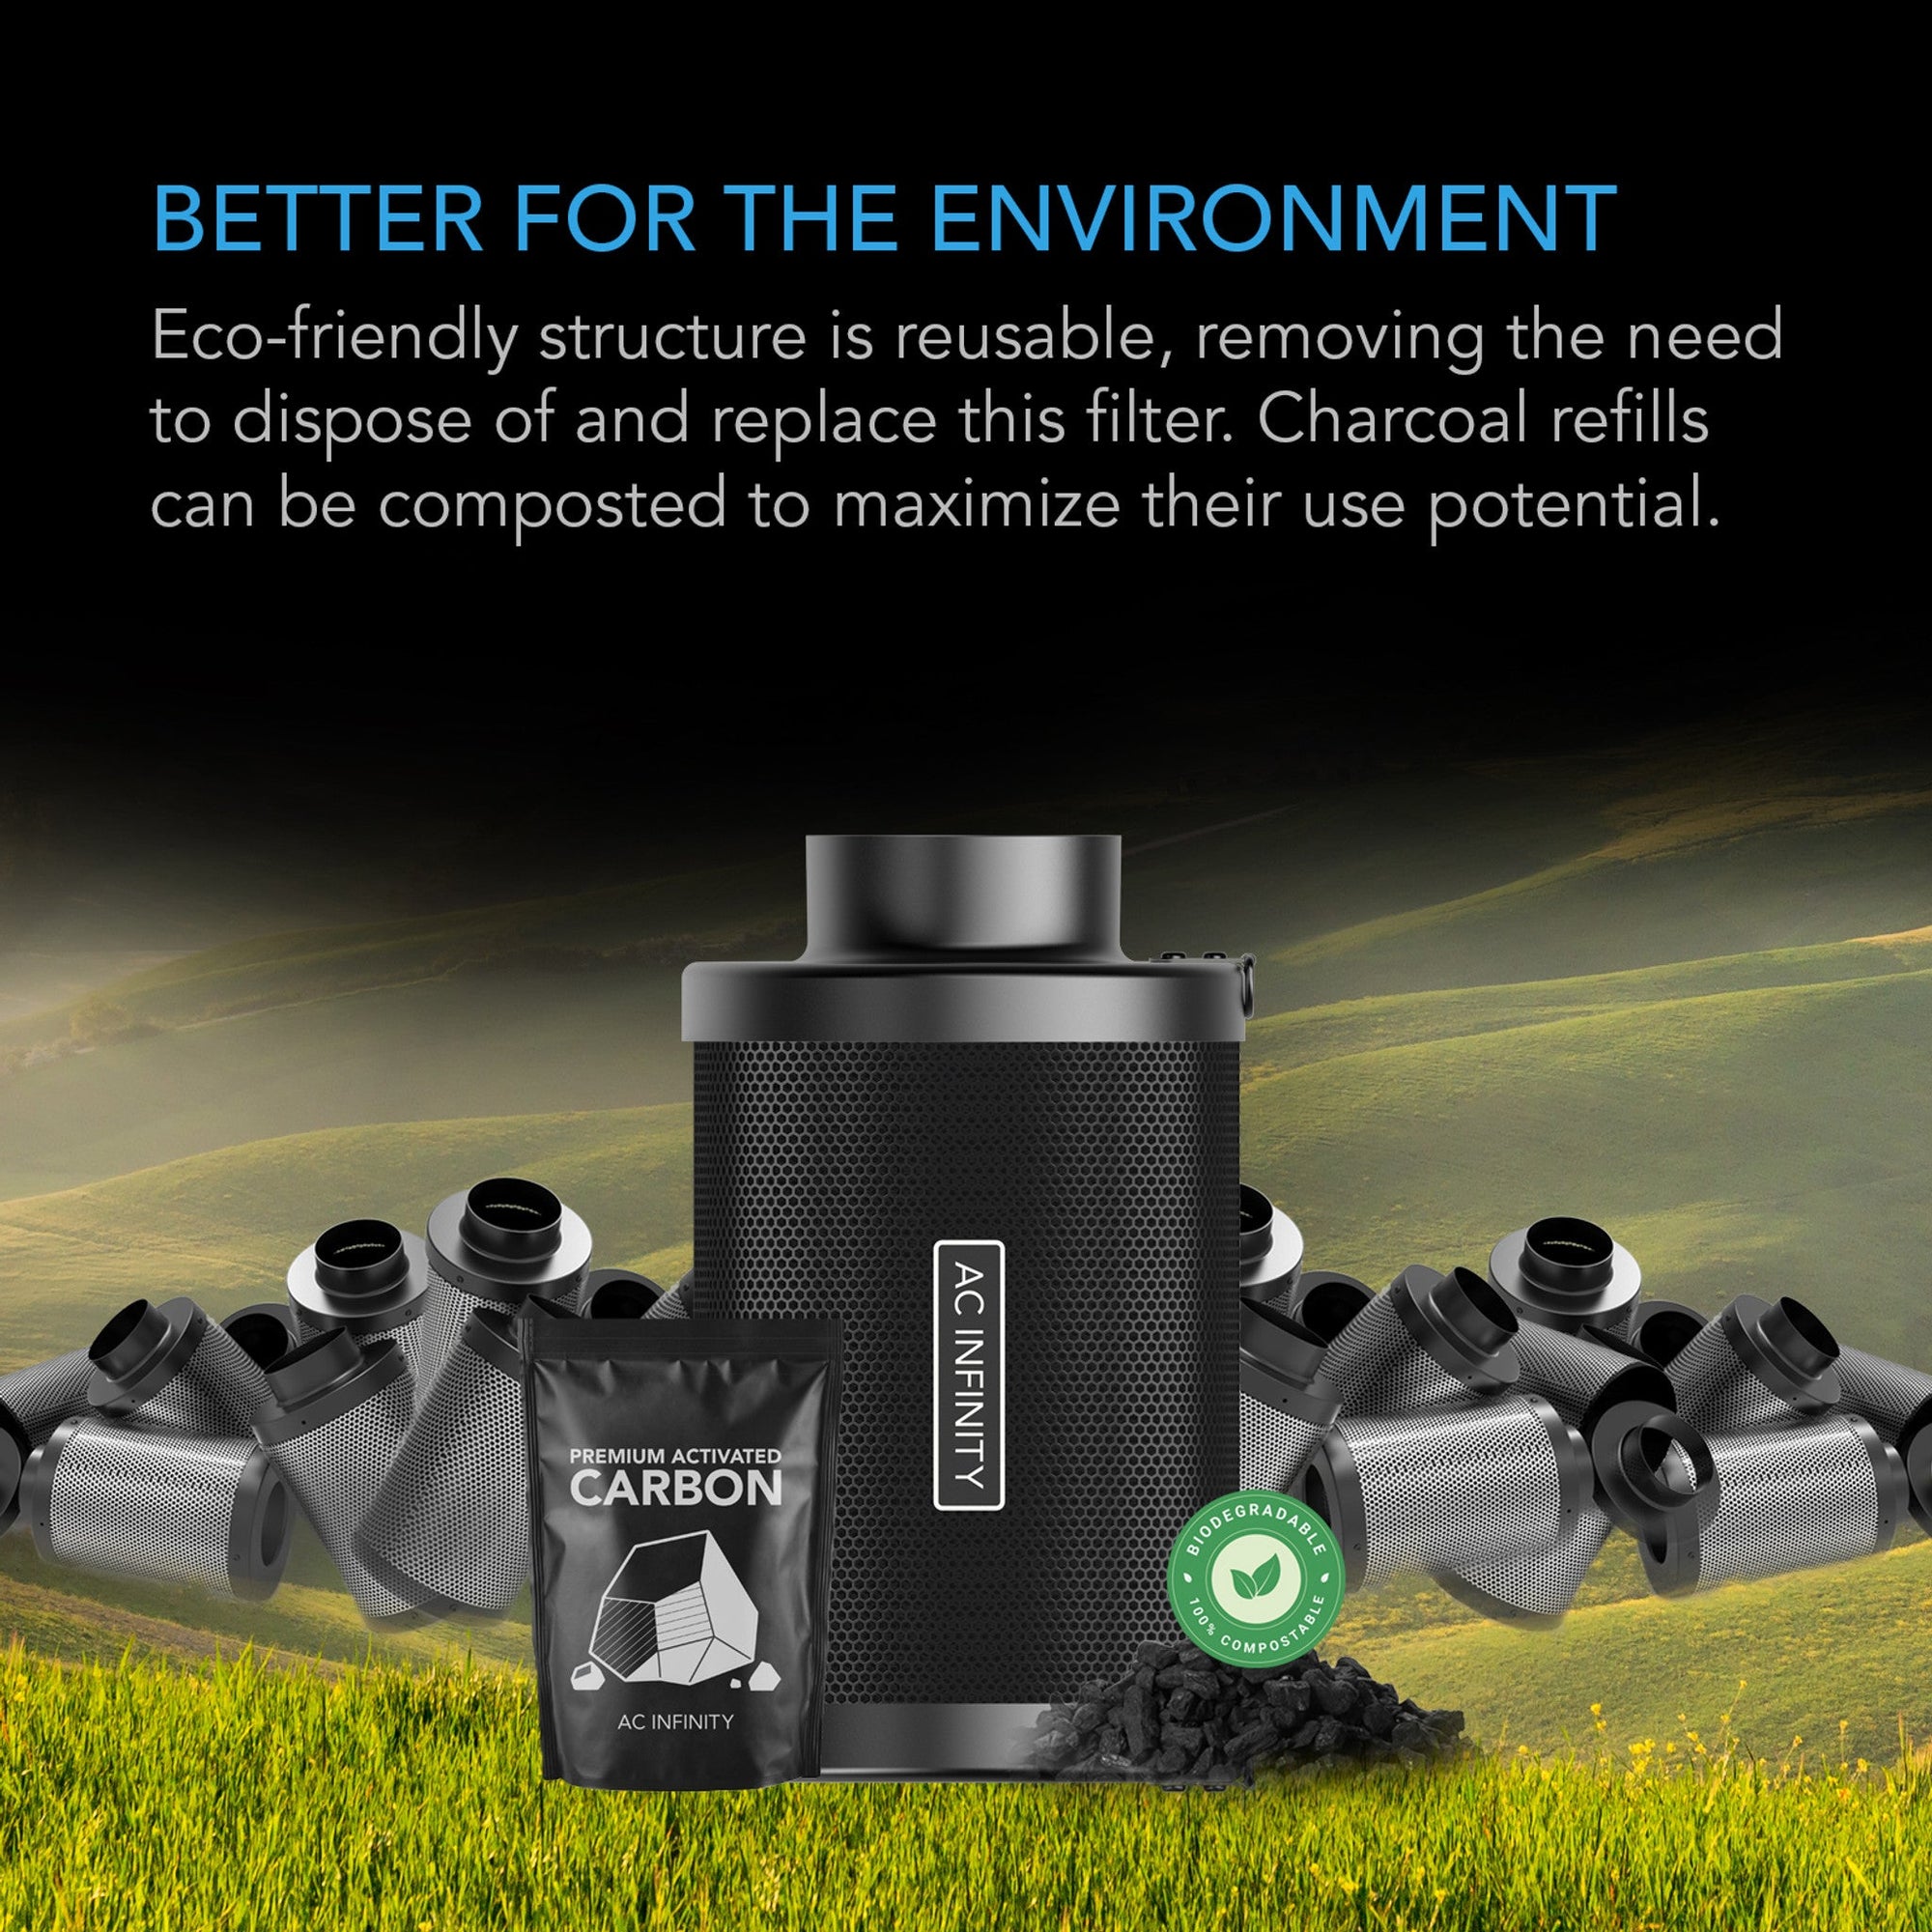 Refillable Carbon filters